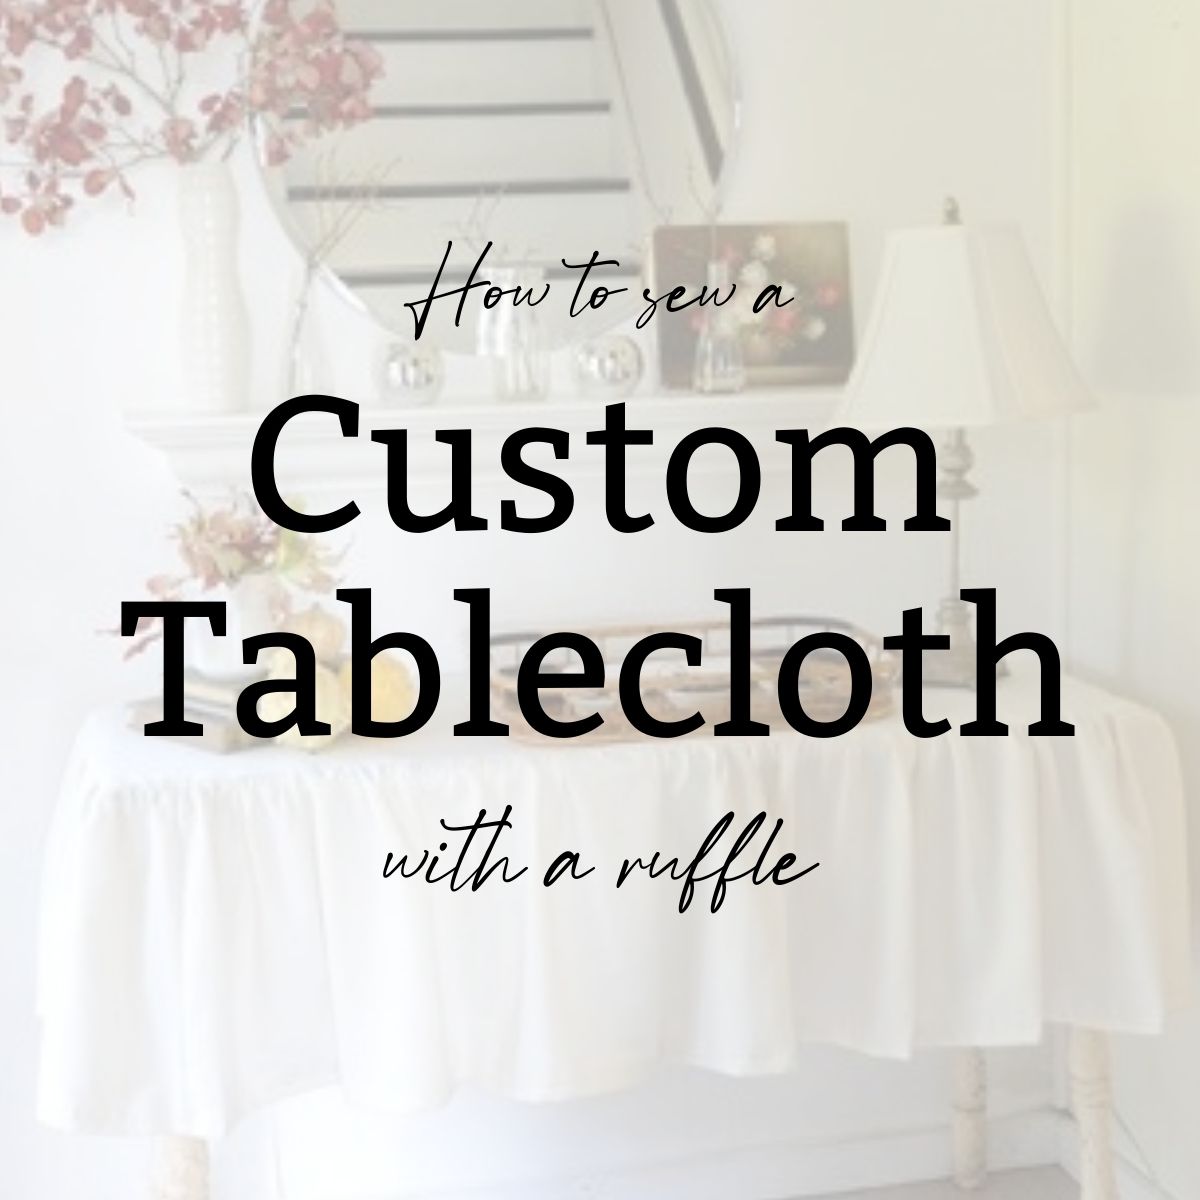 How to Sew a Custom Tablecloth with Ruffles and Pleats